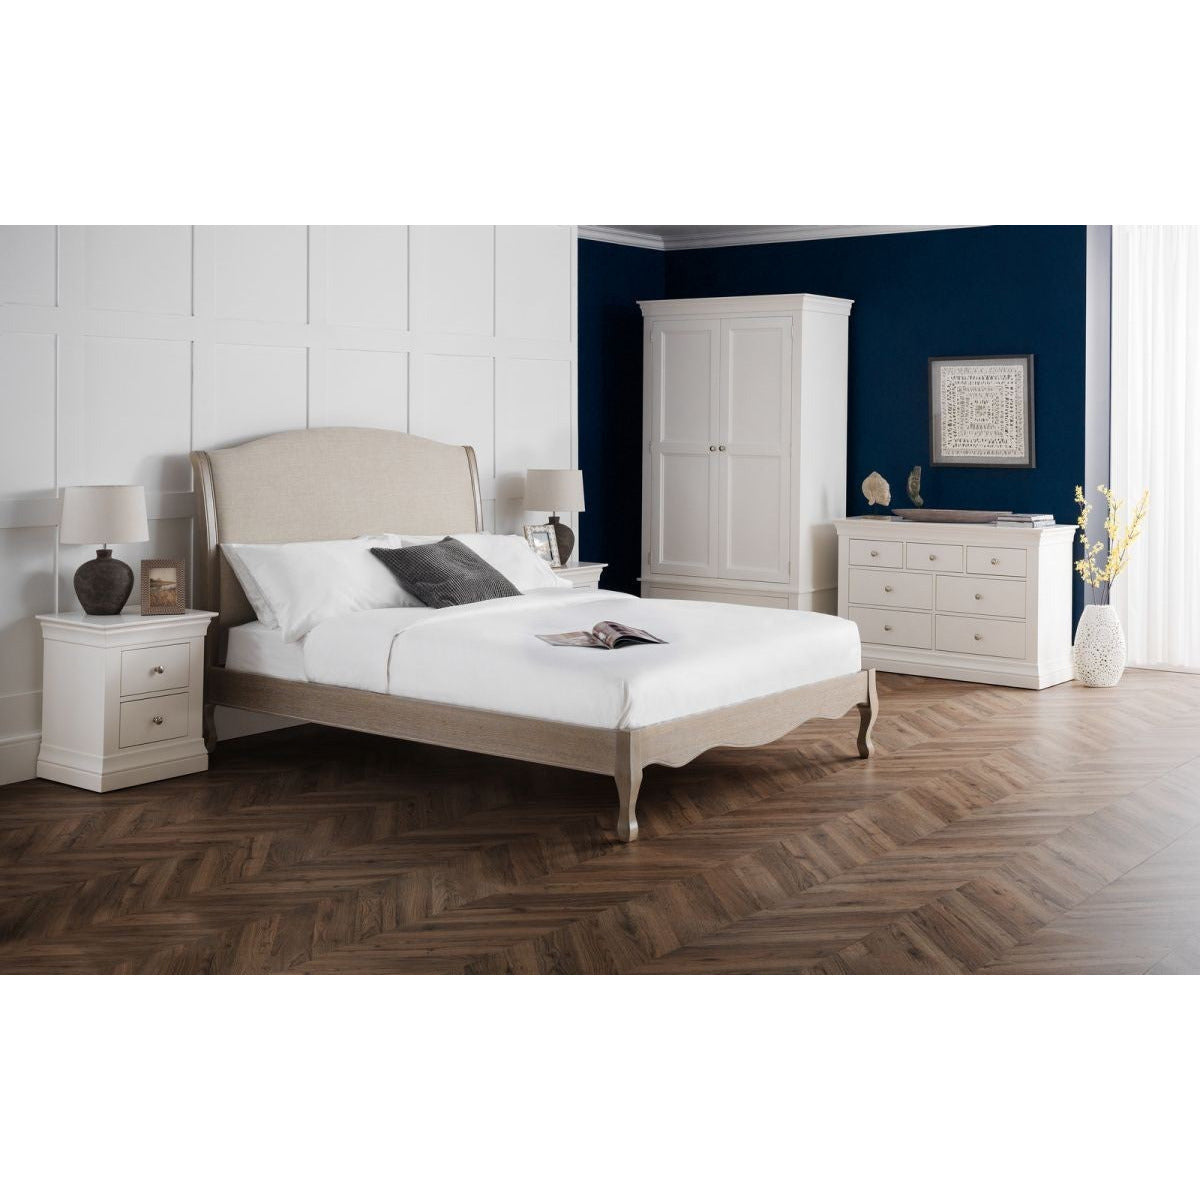 Camille Fabric and Wood bedframe King Size